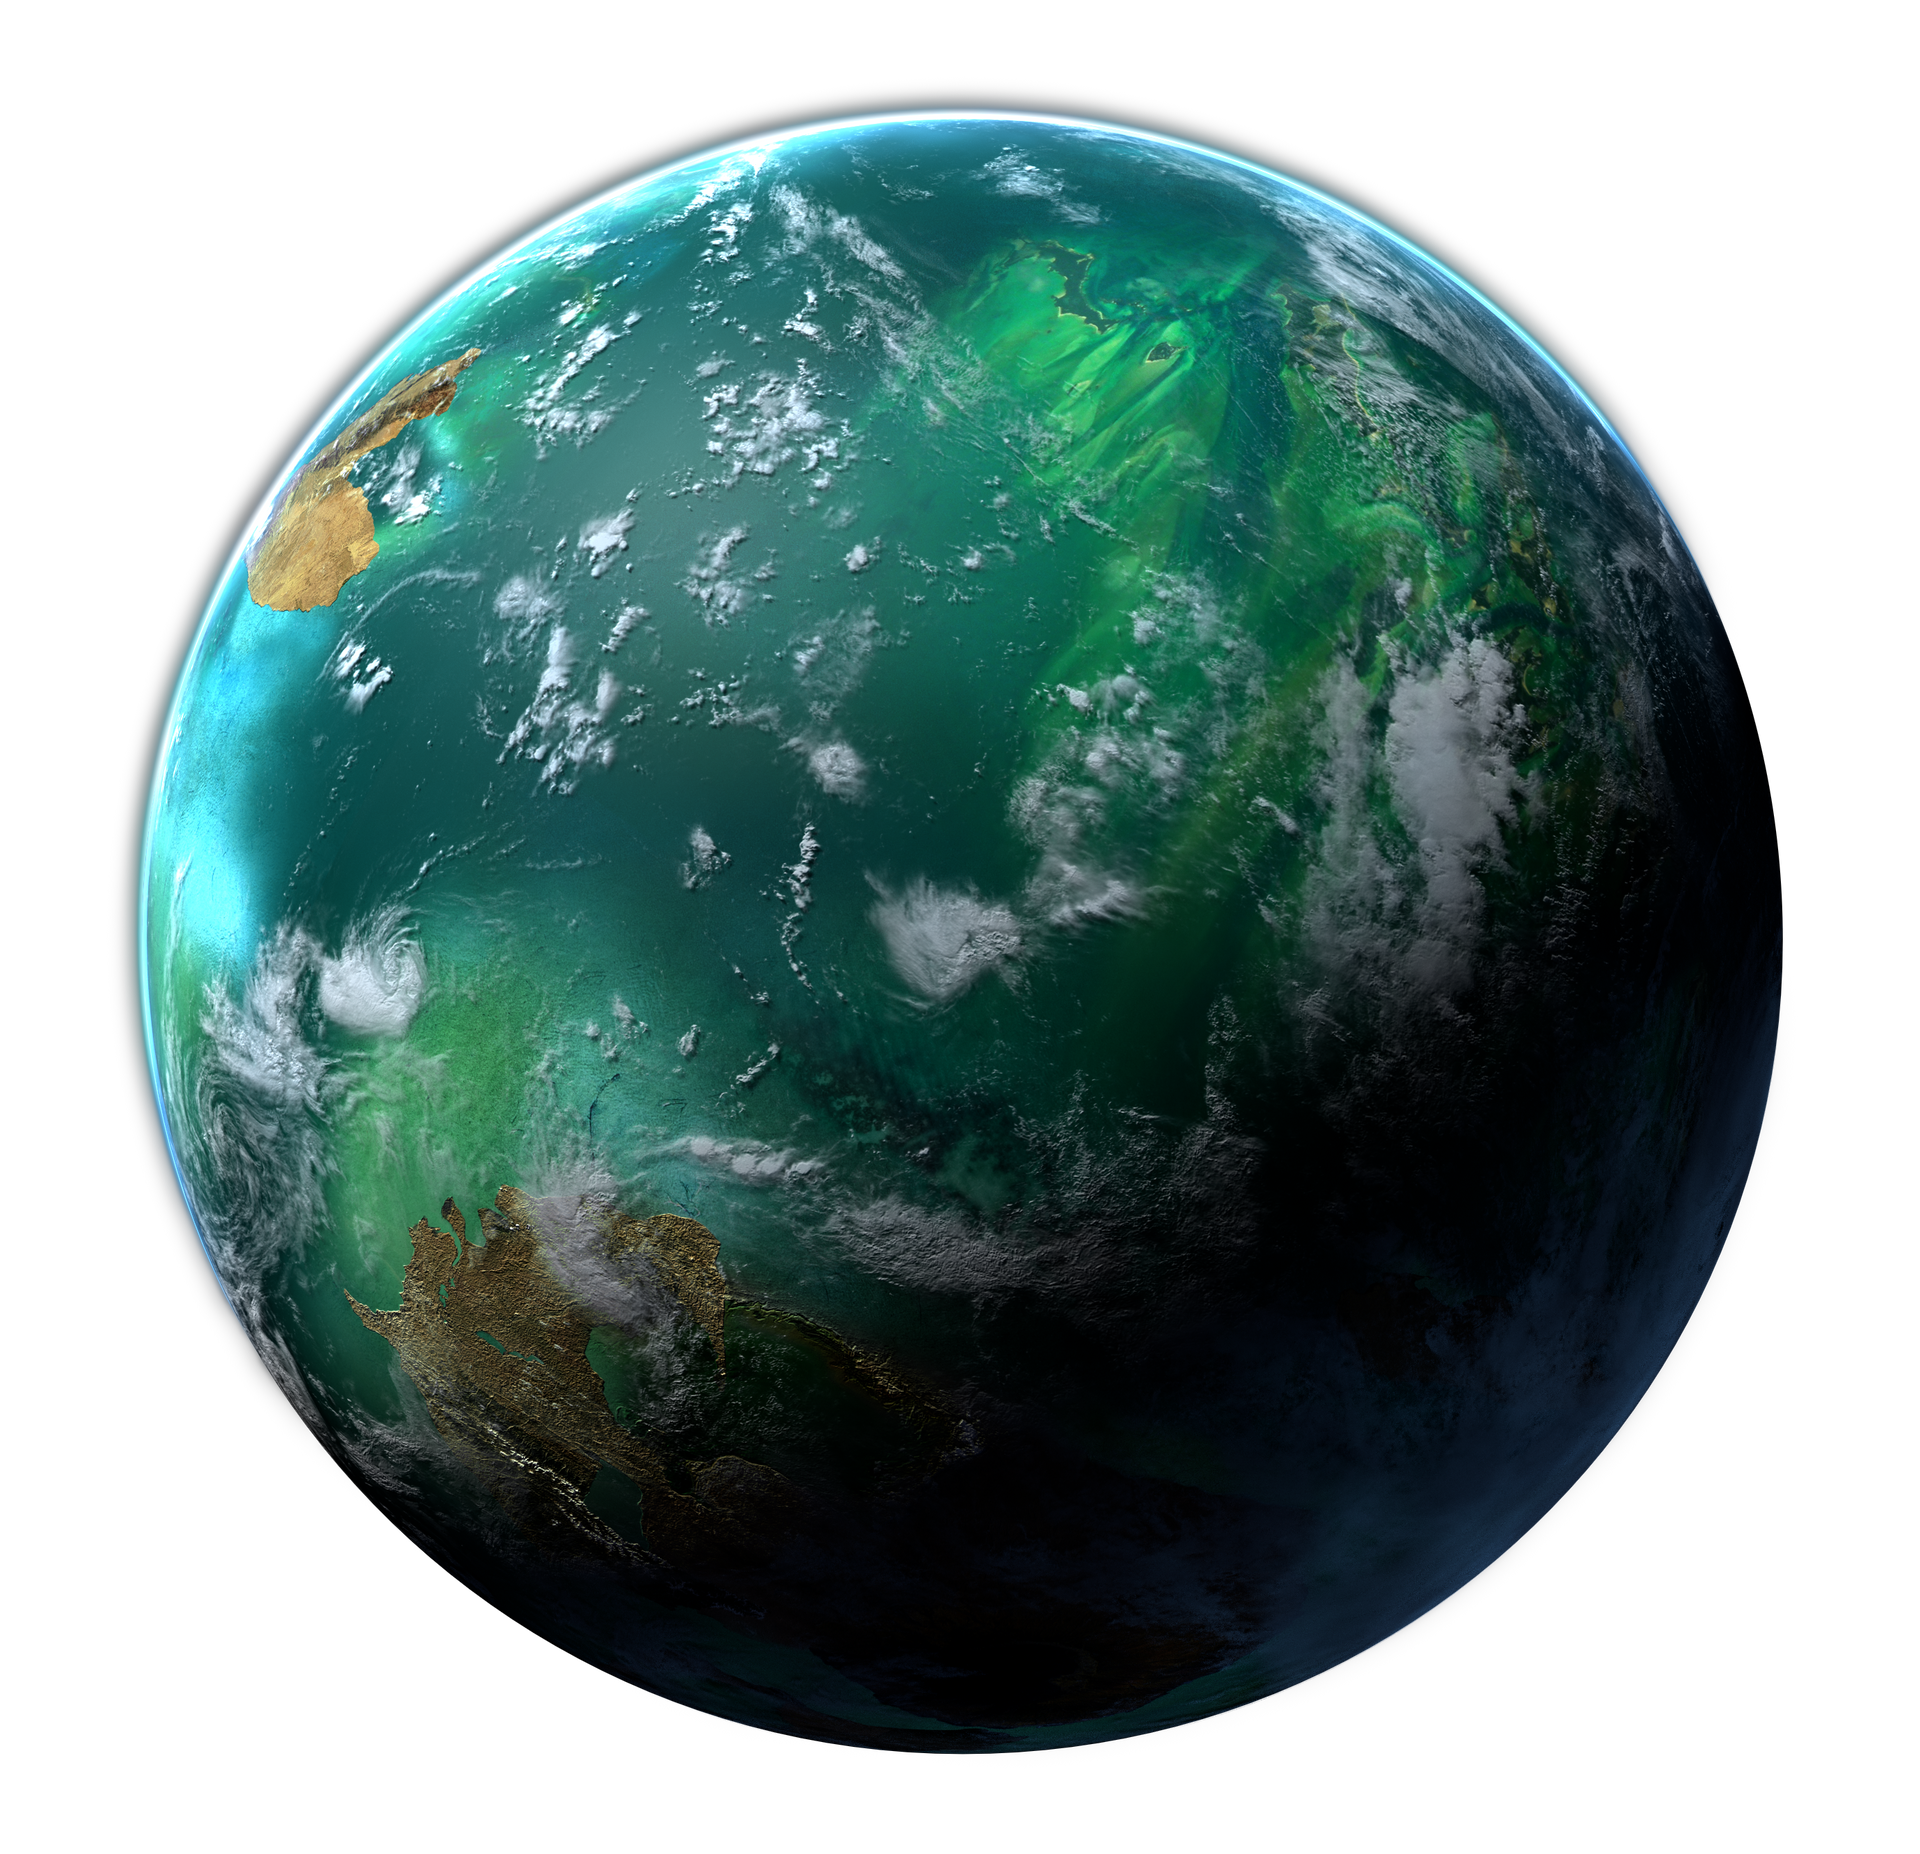 tropic_planet_stock_by_dadrian_dd0hnbh-fullview.png